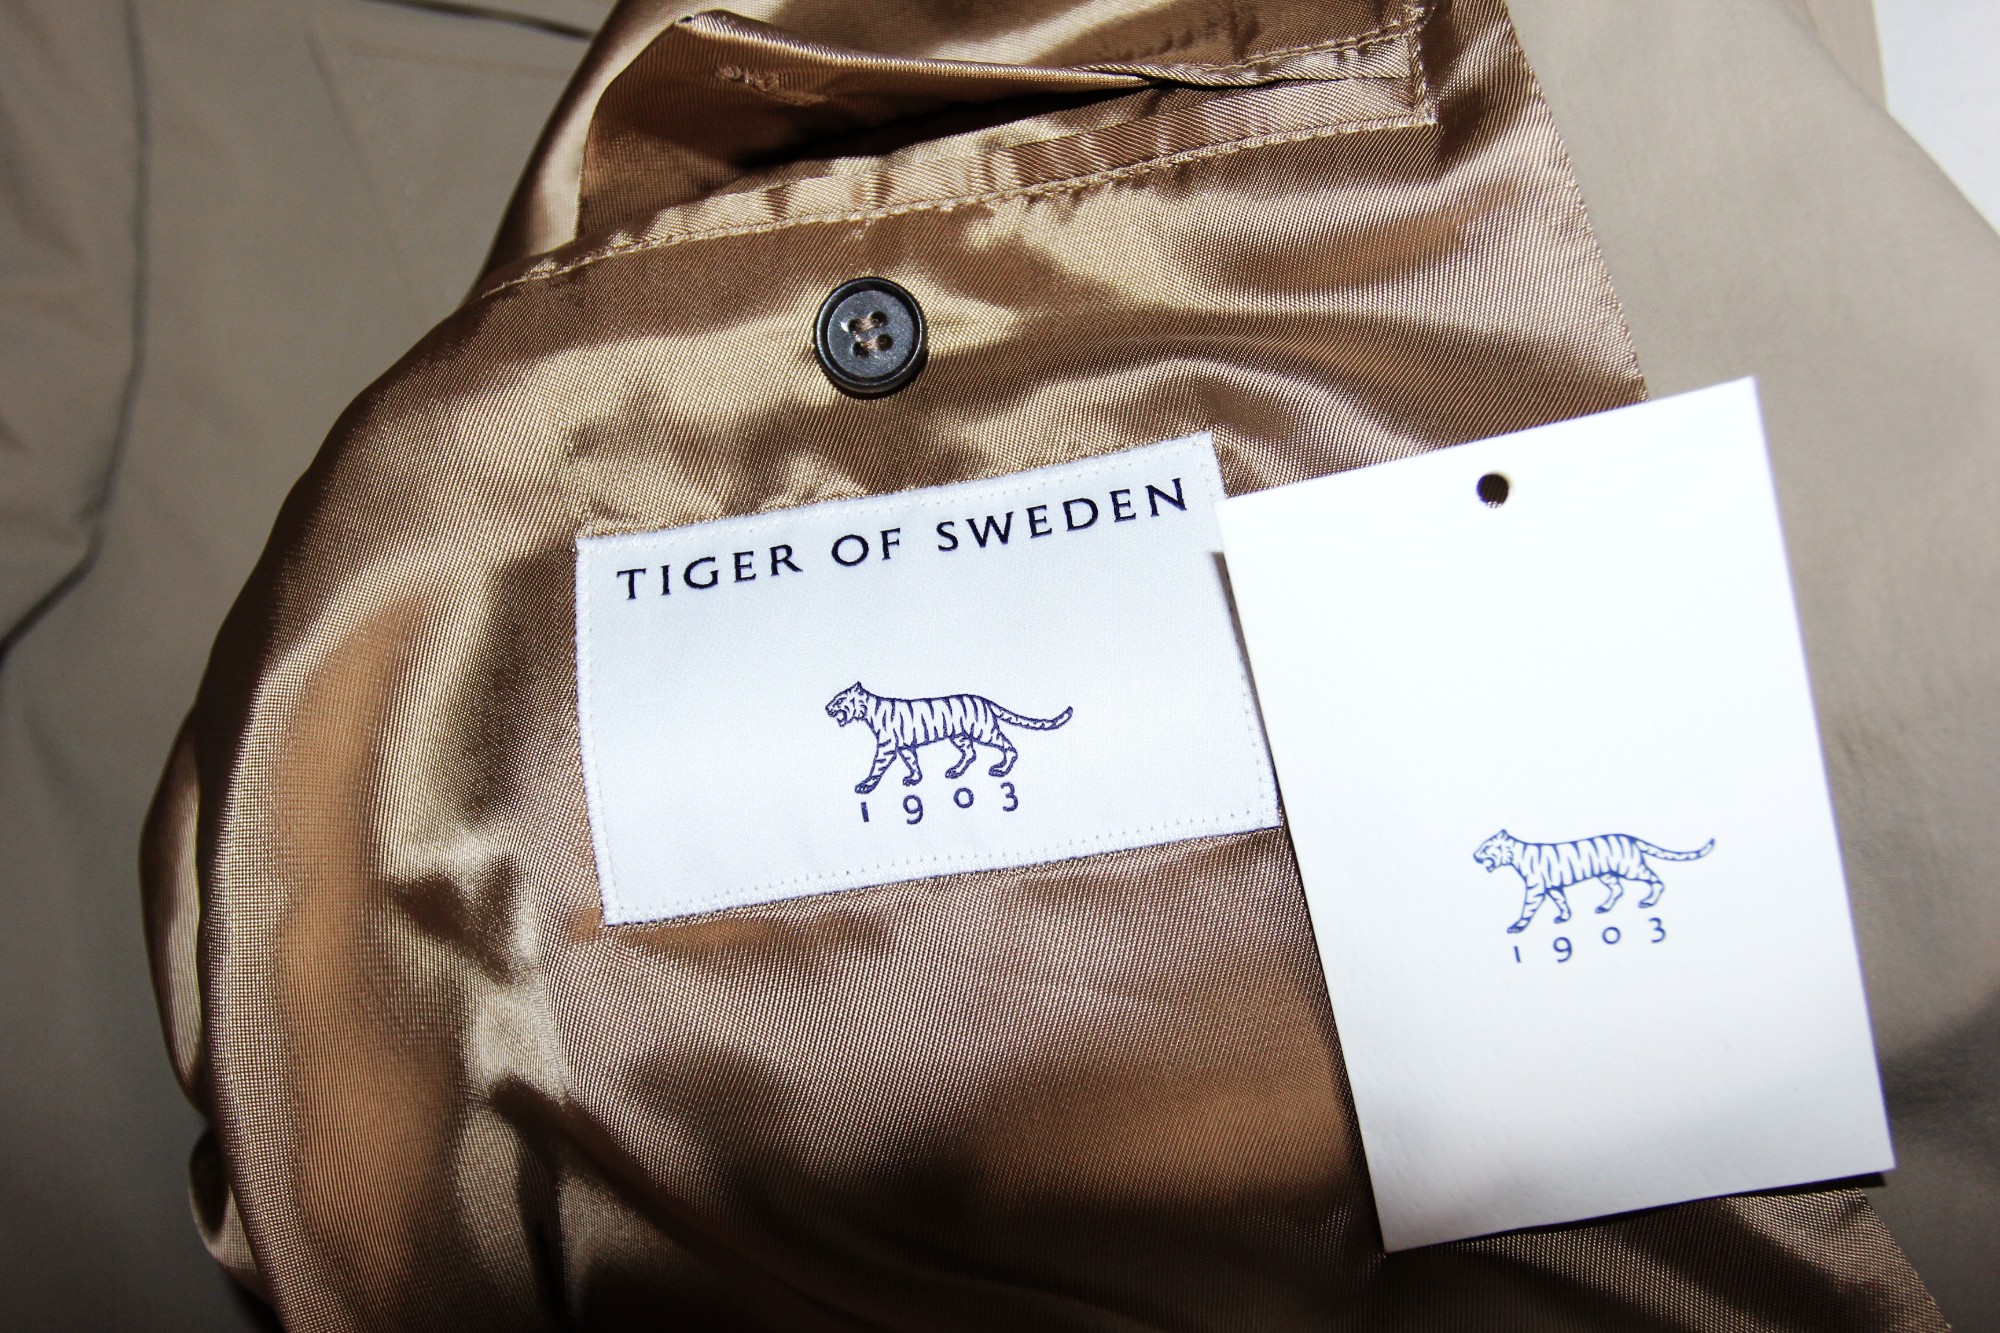 BNWT SS23 TIGER OF SWEDEN LONG TRENCH COAT 54 - 7